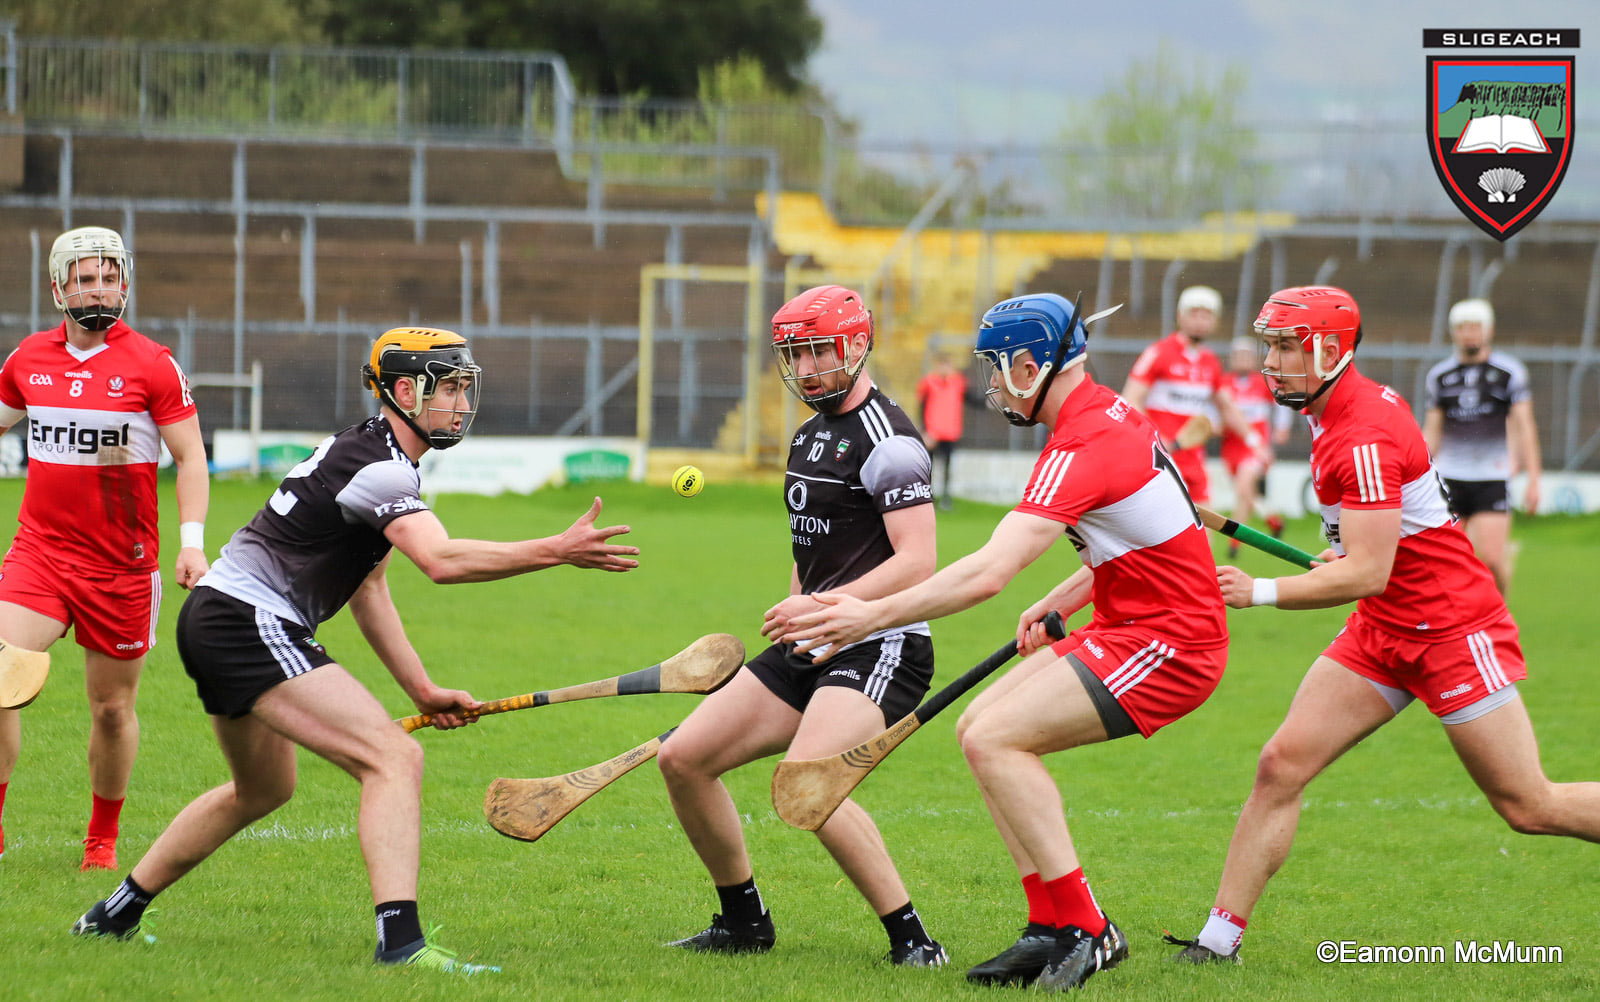 Senior hurlers overcome by Derry second half surge in second round of Christy Ring Cup